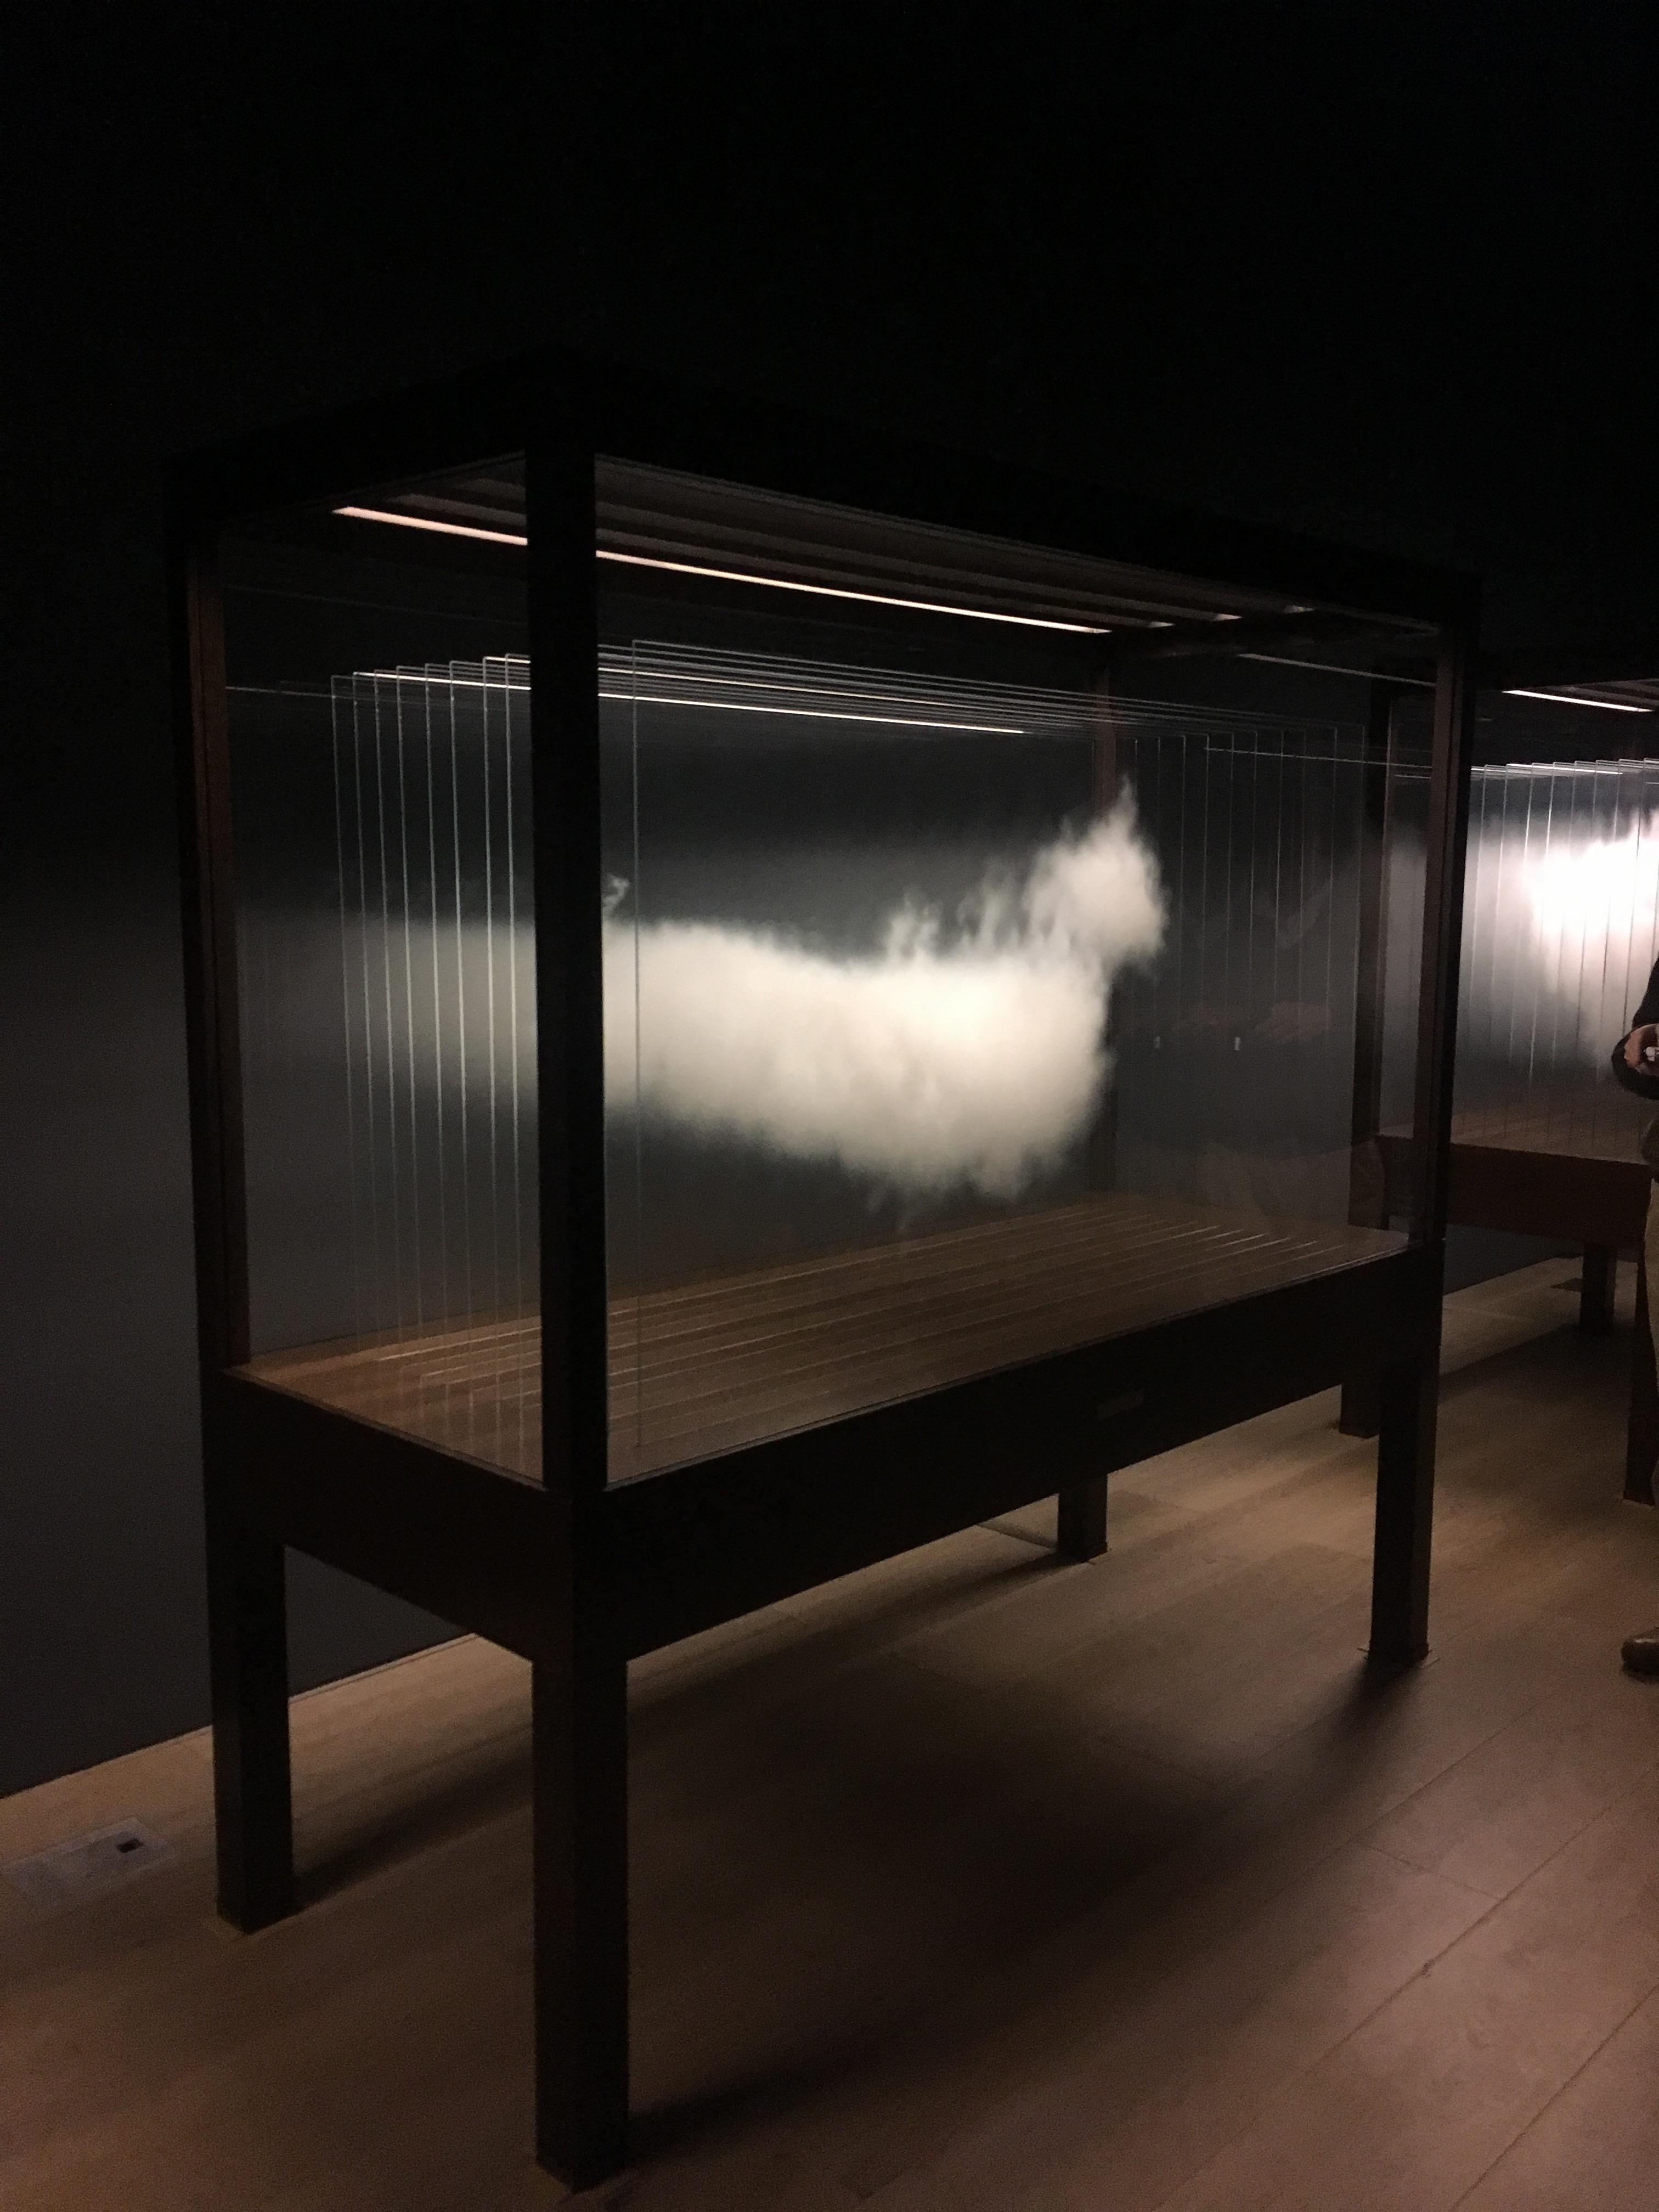 New works of Leandro Erlich : The Cloud －Japan